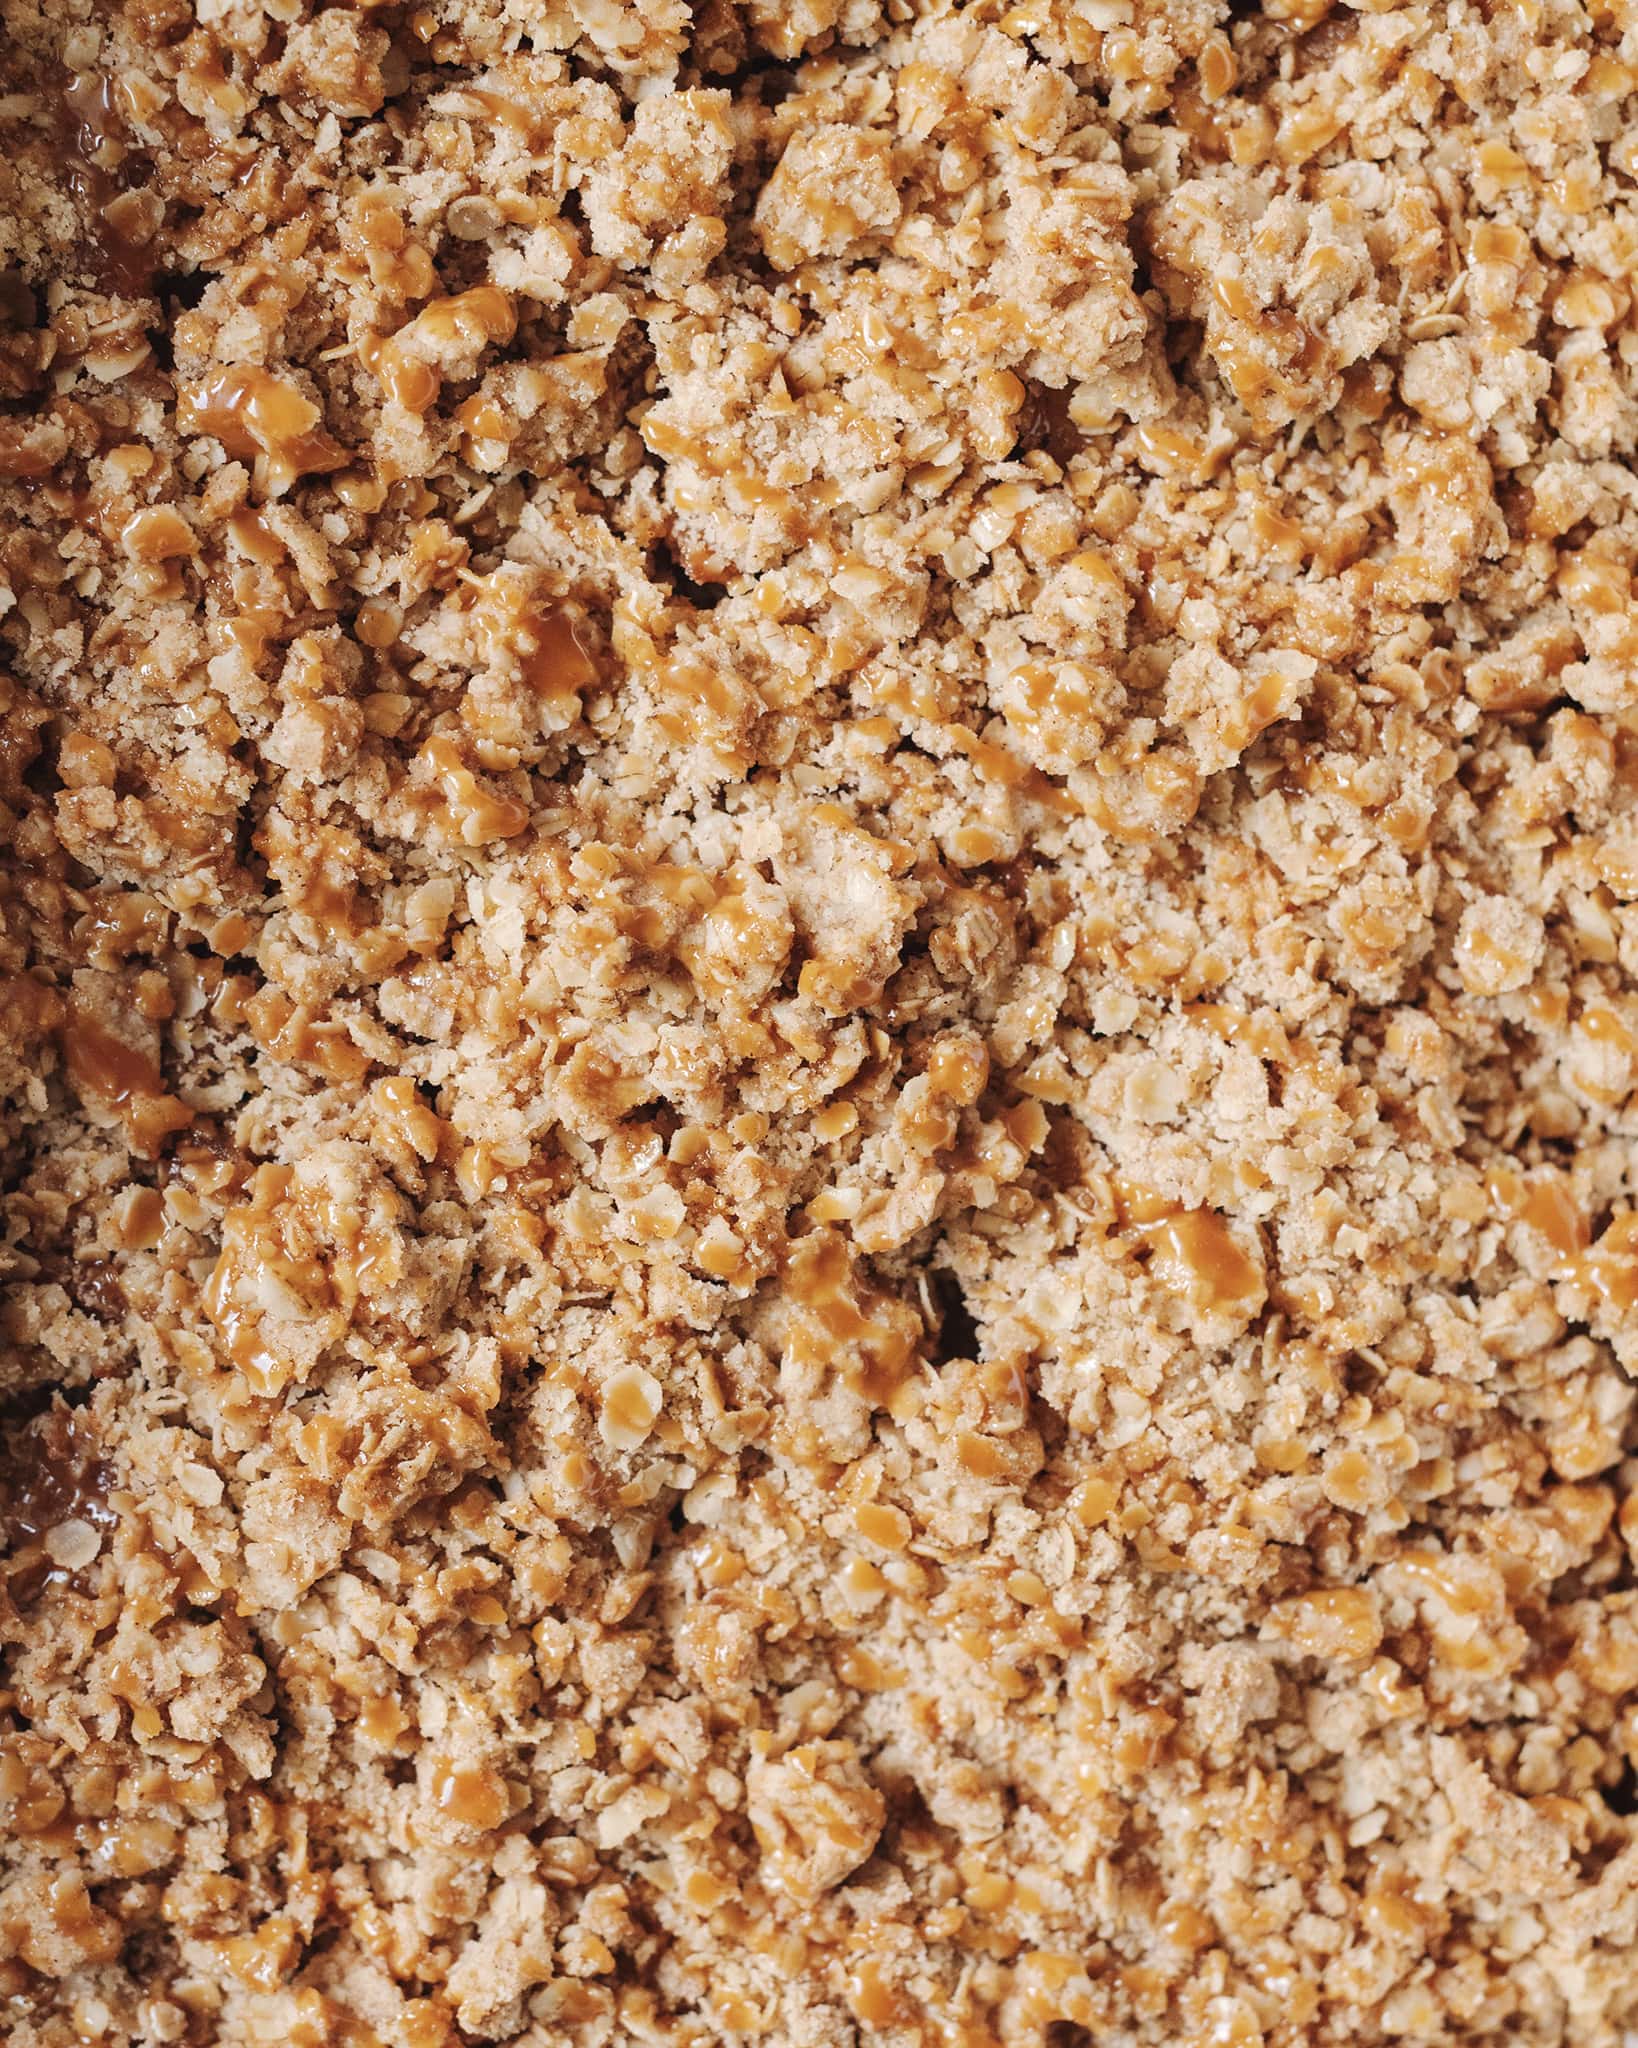 The oat crumble topping drizzled with caramel sauce